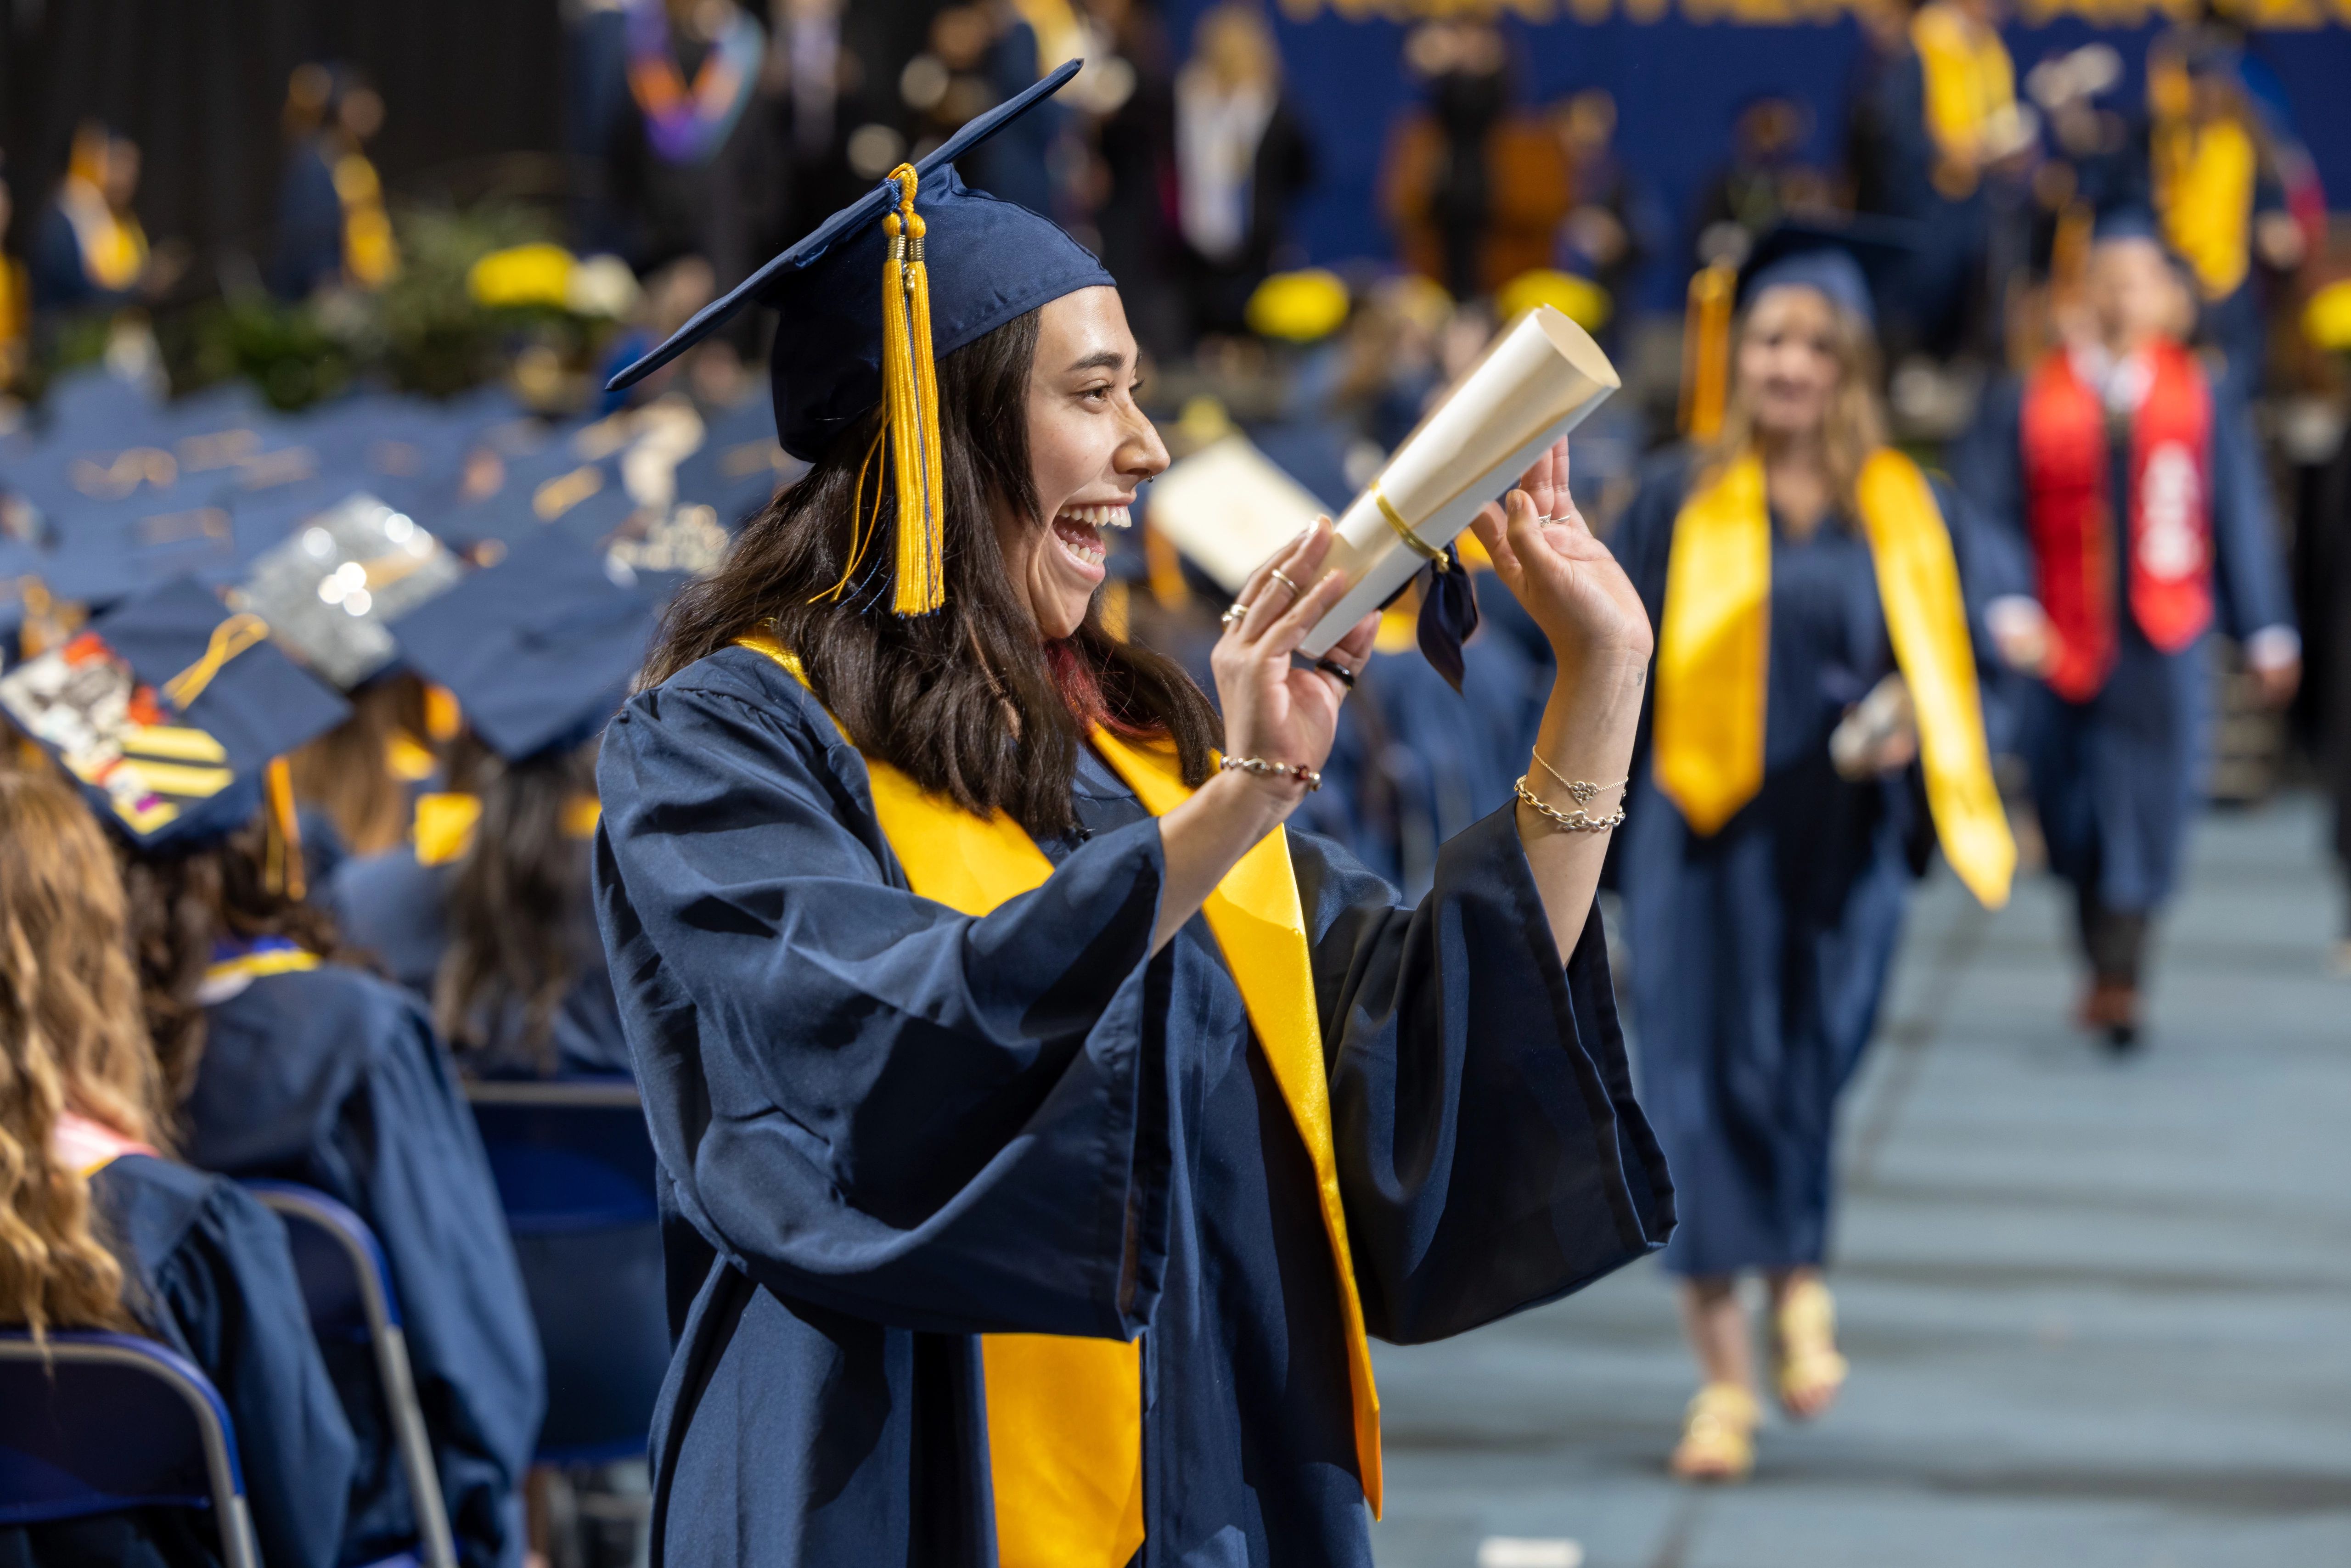 NAU grad walking down an aisle wearing regalia with diploma in hand waving to her family